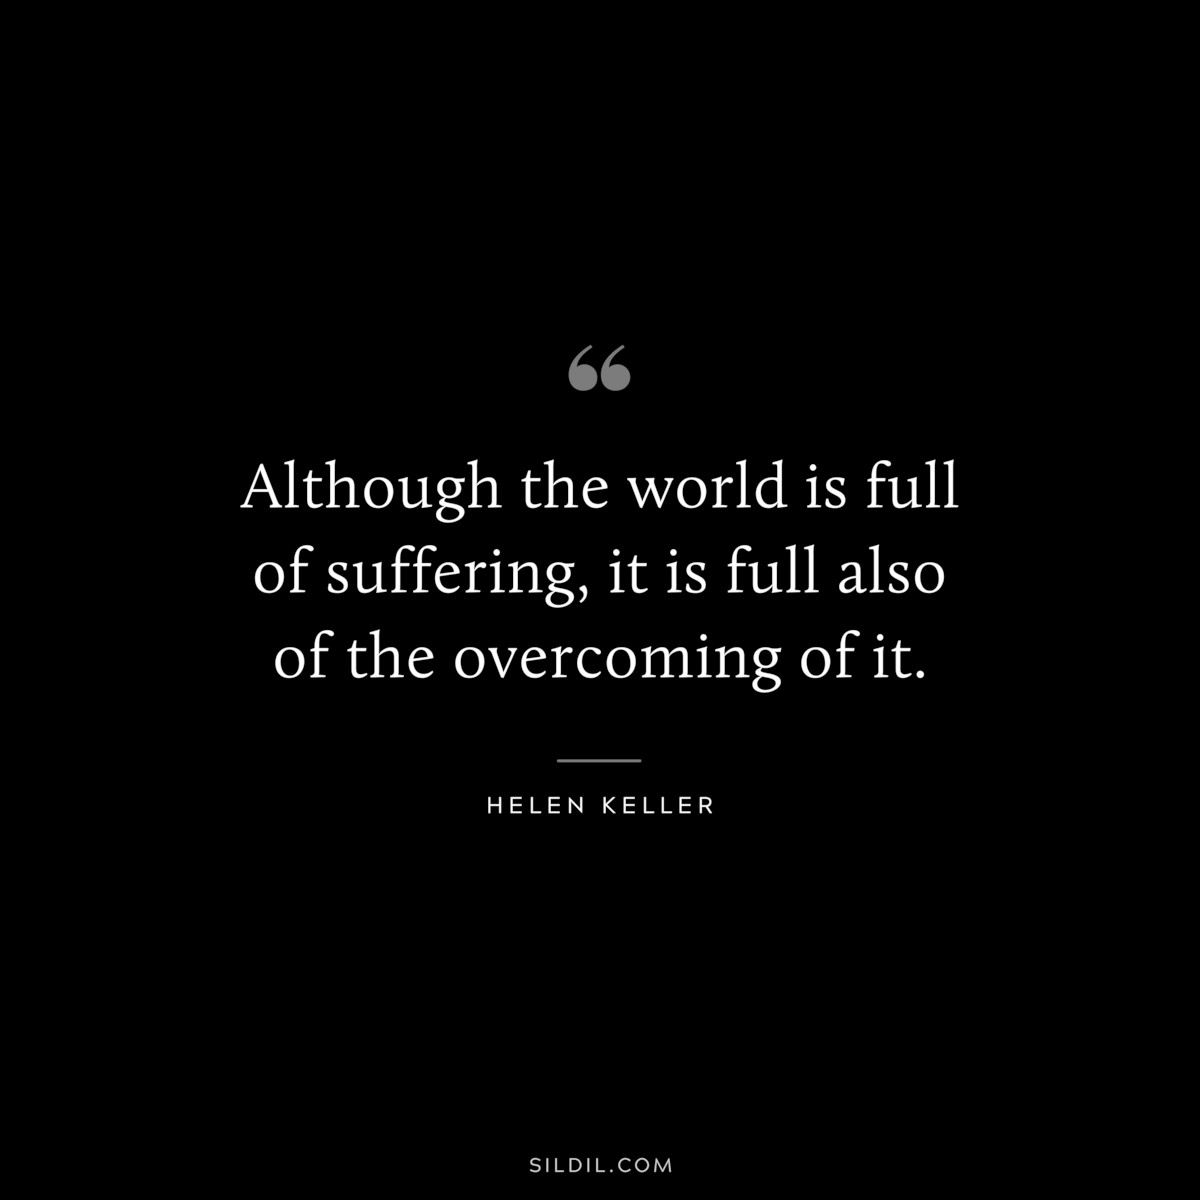 Although the world is full of suffering, it is full also of the overcoming of it. ― Helen Keller